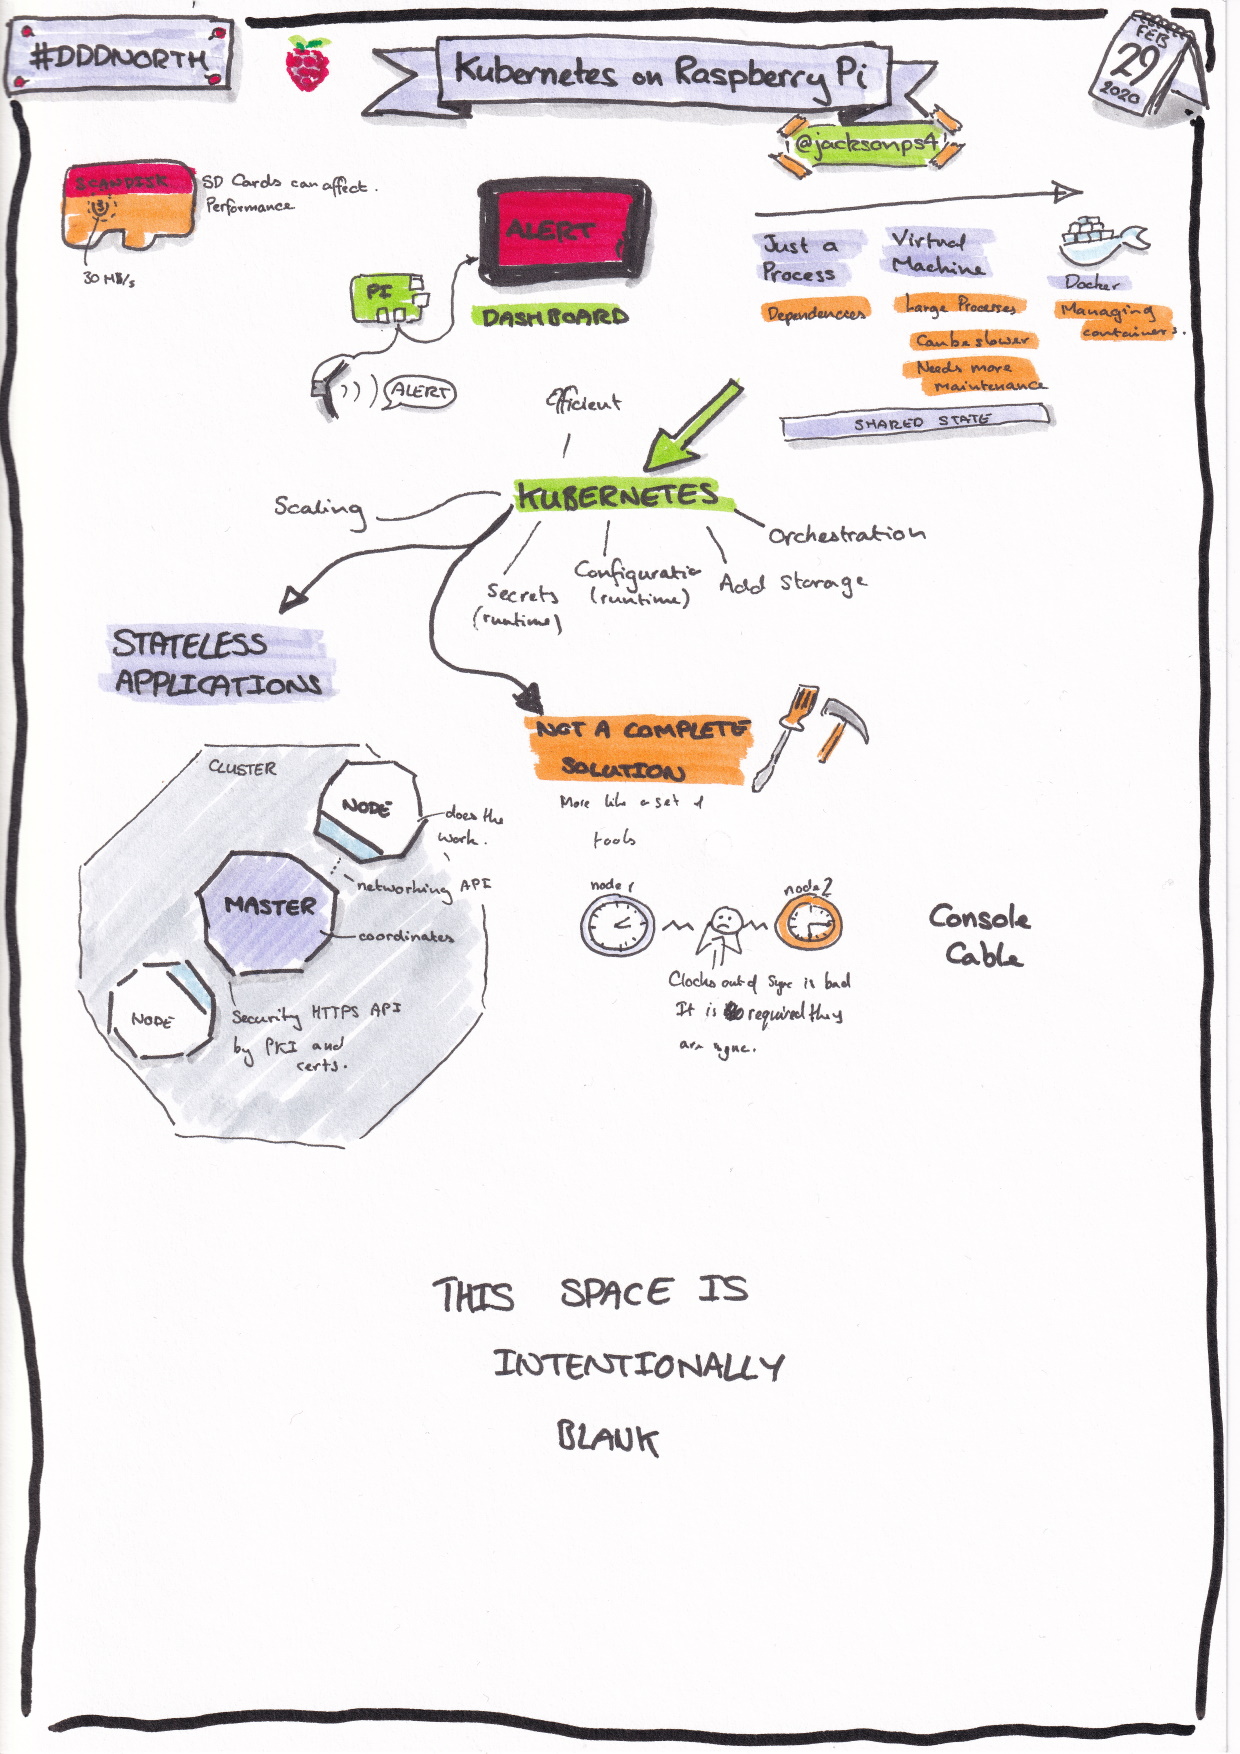 Sketchnotes from the talk 'Kubernetes on Raspberry Pi' by Chris Wraith